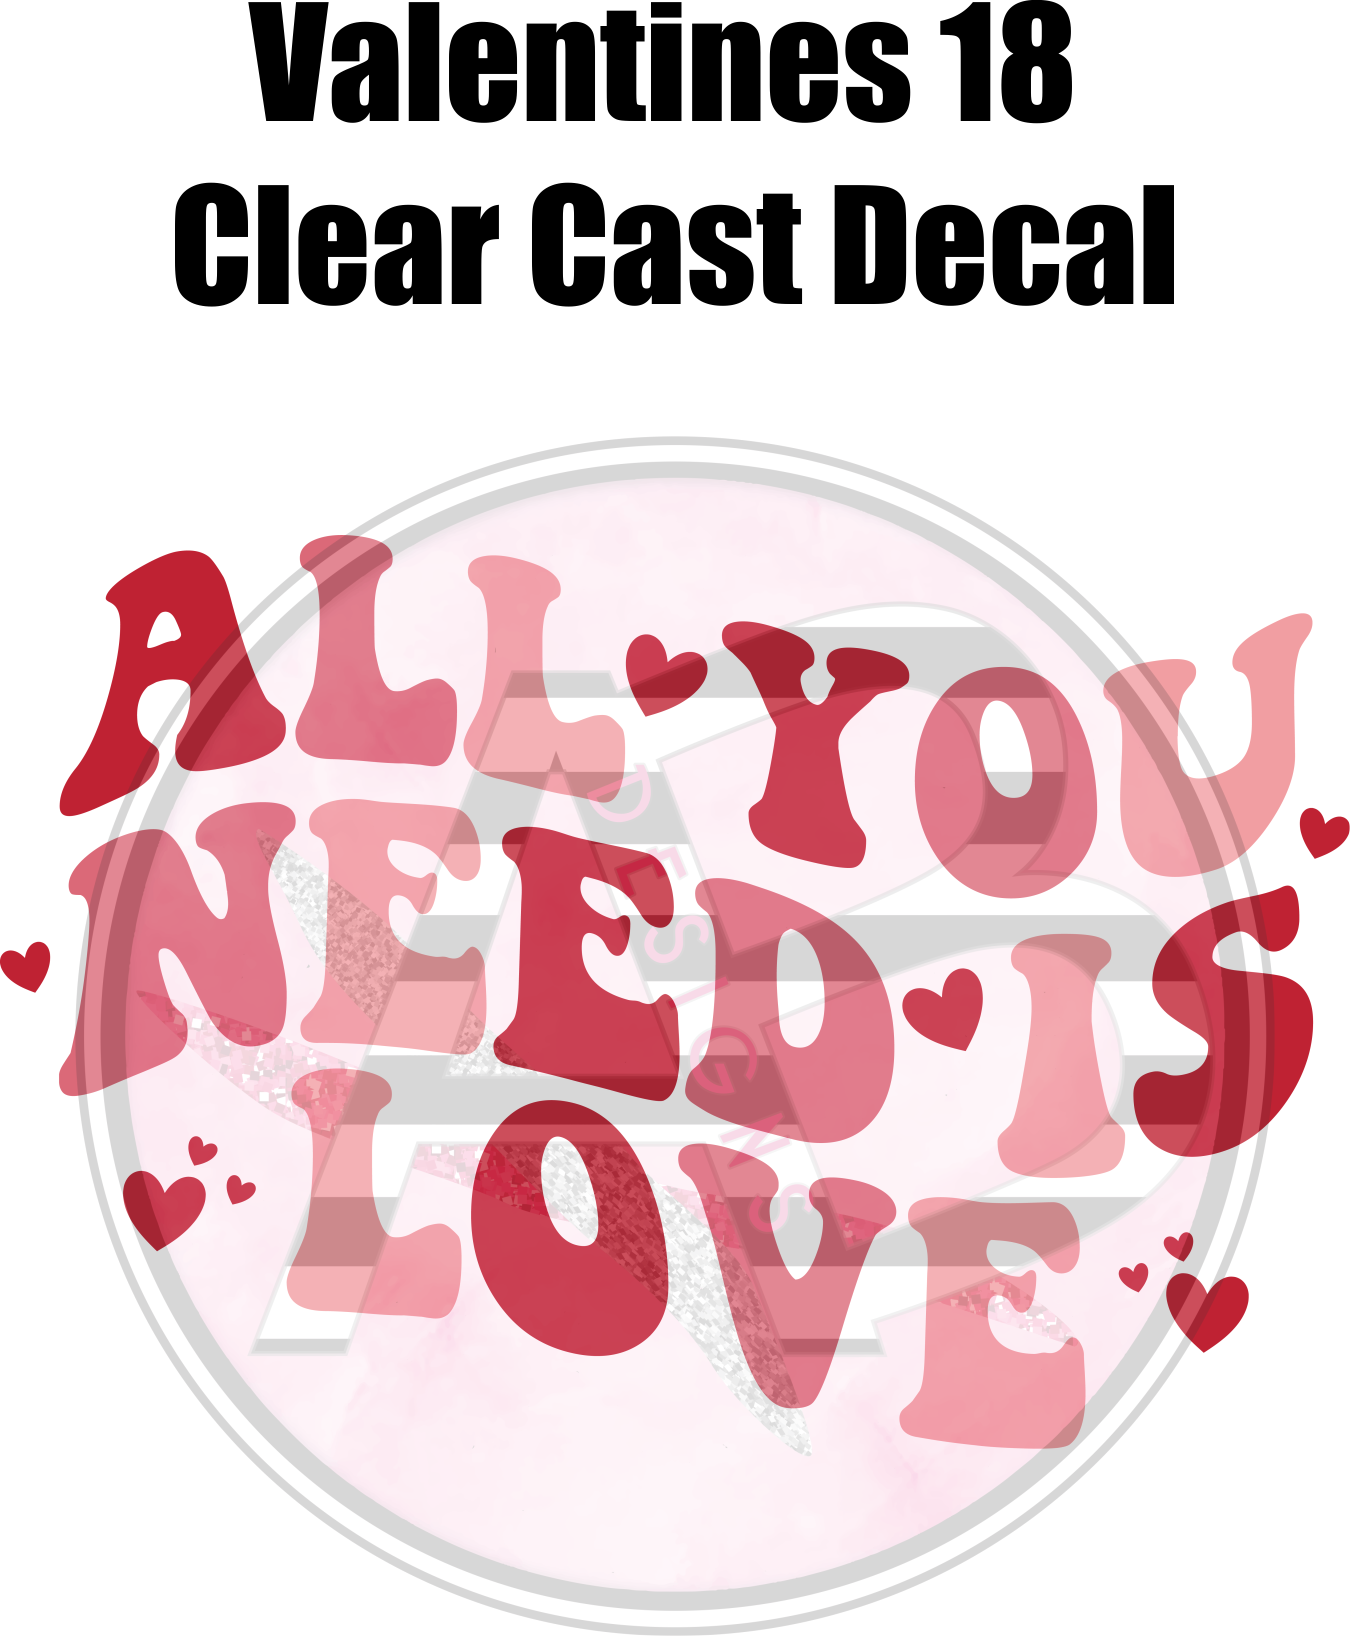 Valentines 18 - Clear Cast Decal